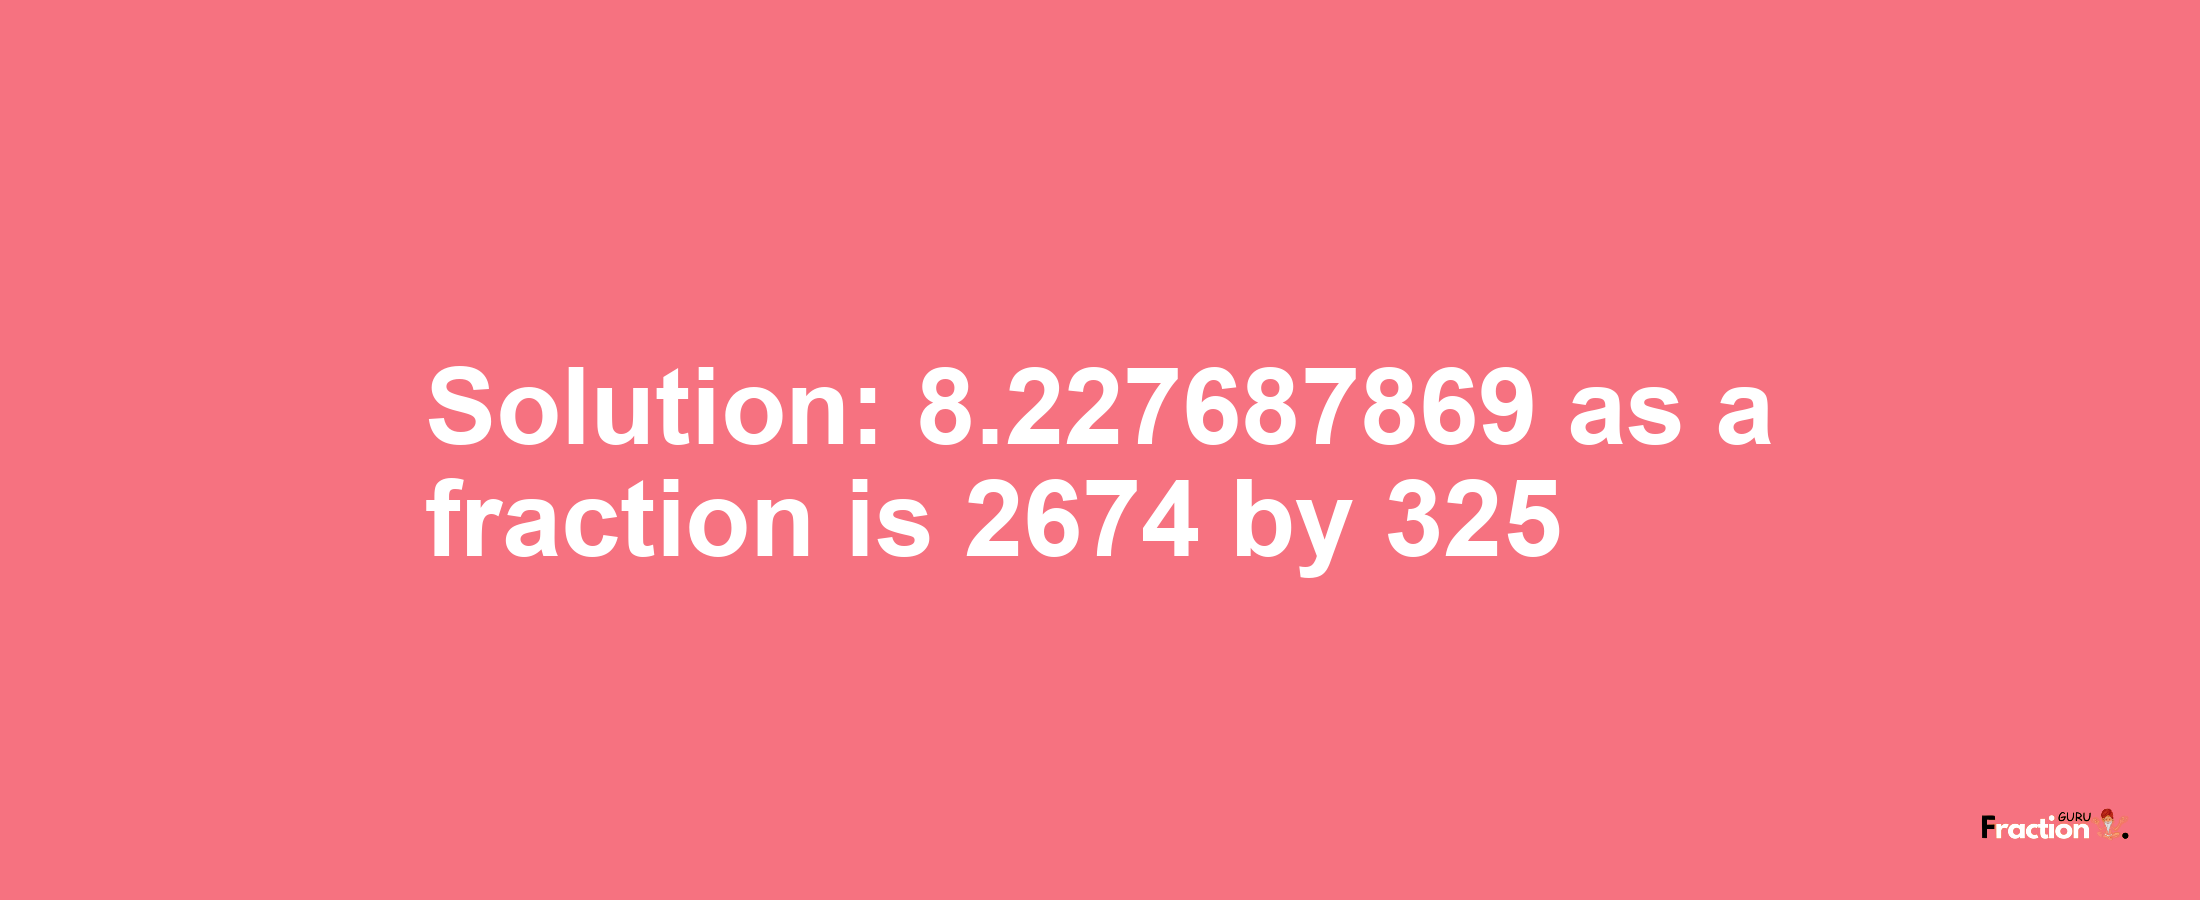 Solution:8.227687869 as a fraction is 2674/325